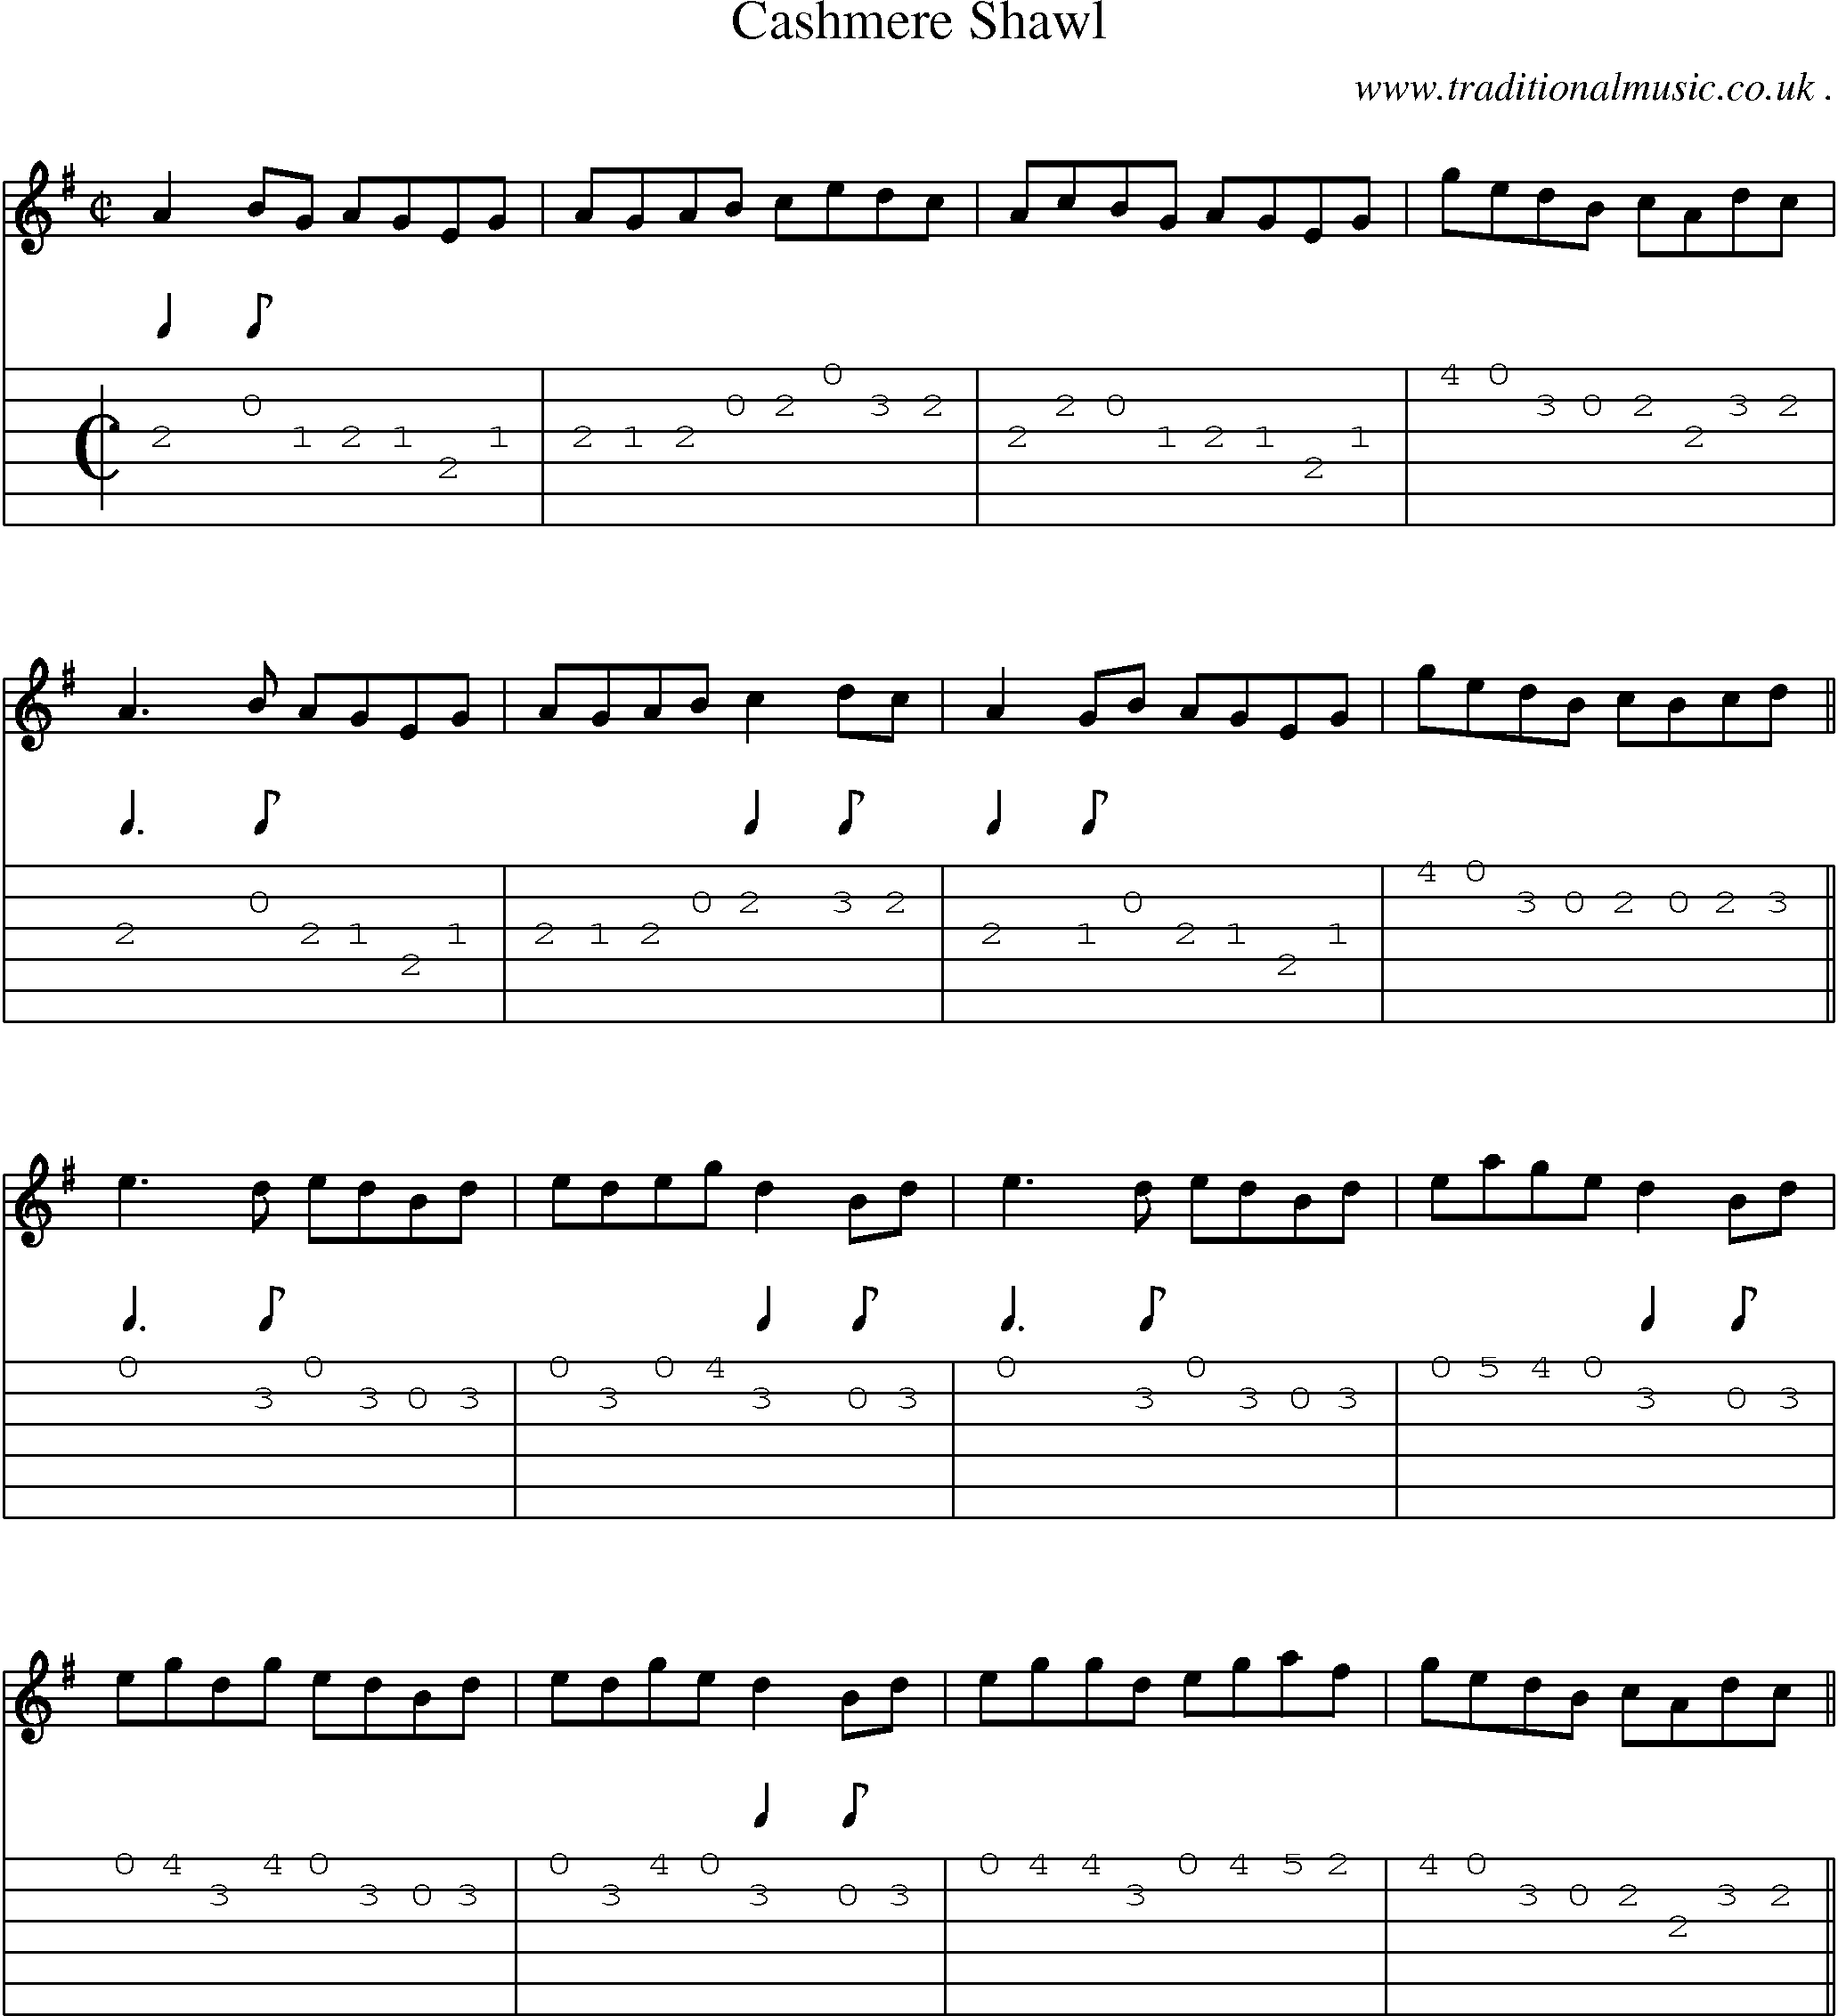 Sheet-Music and Guitar Tabs for Cashmere Shawl